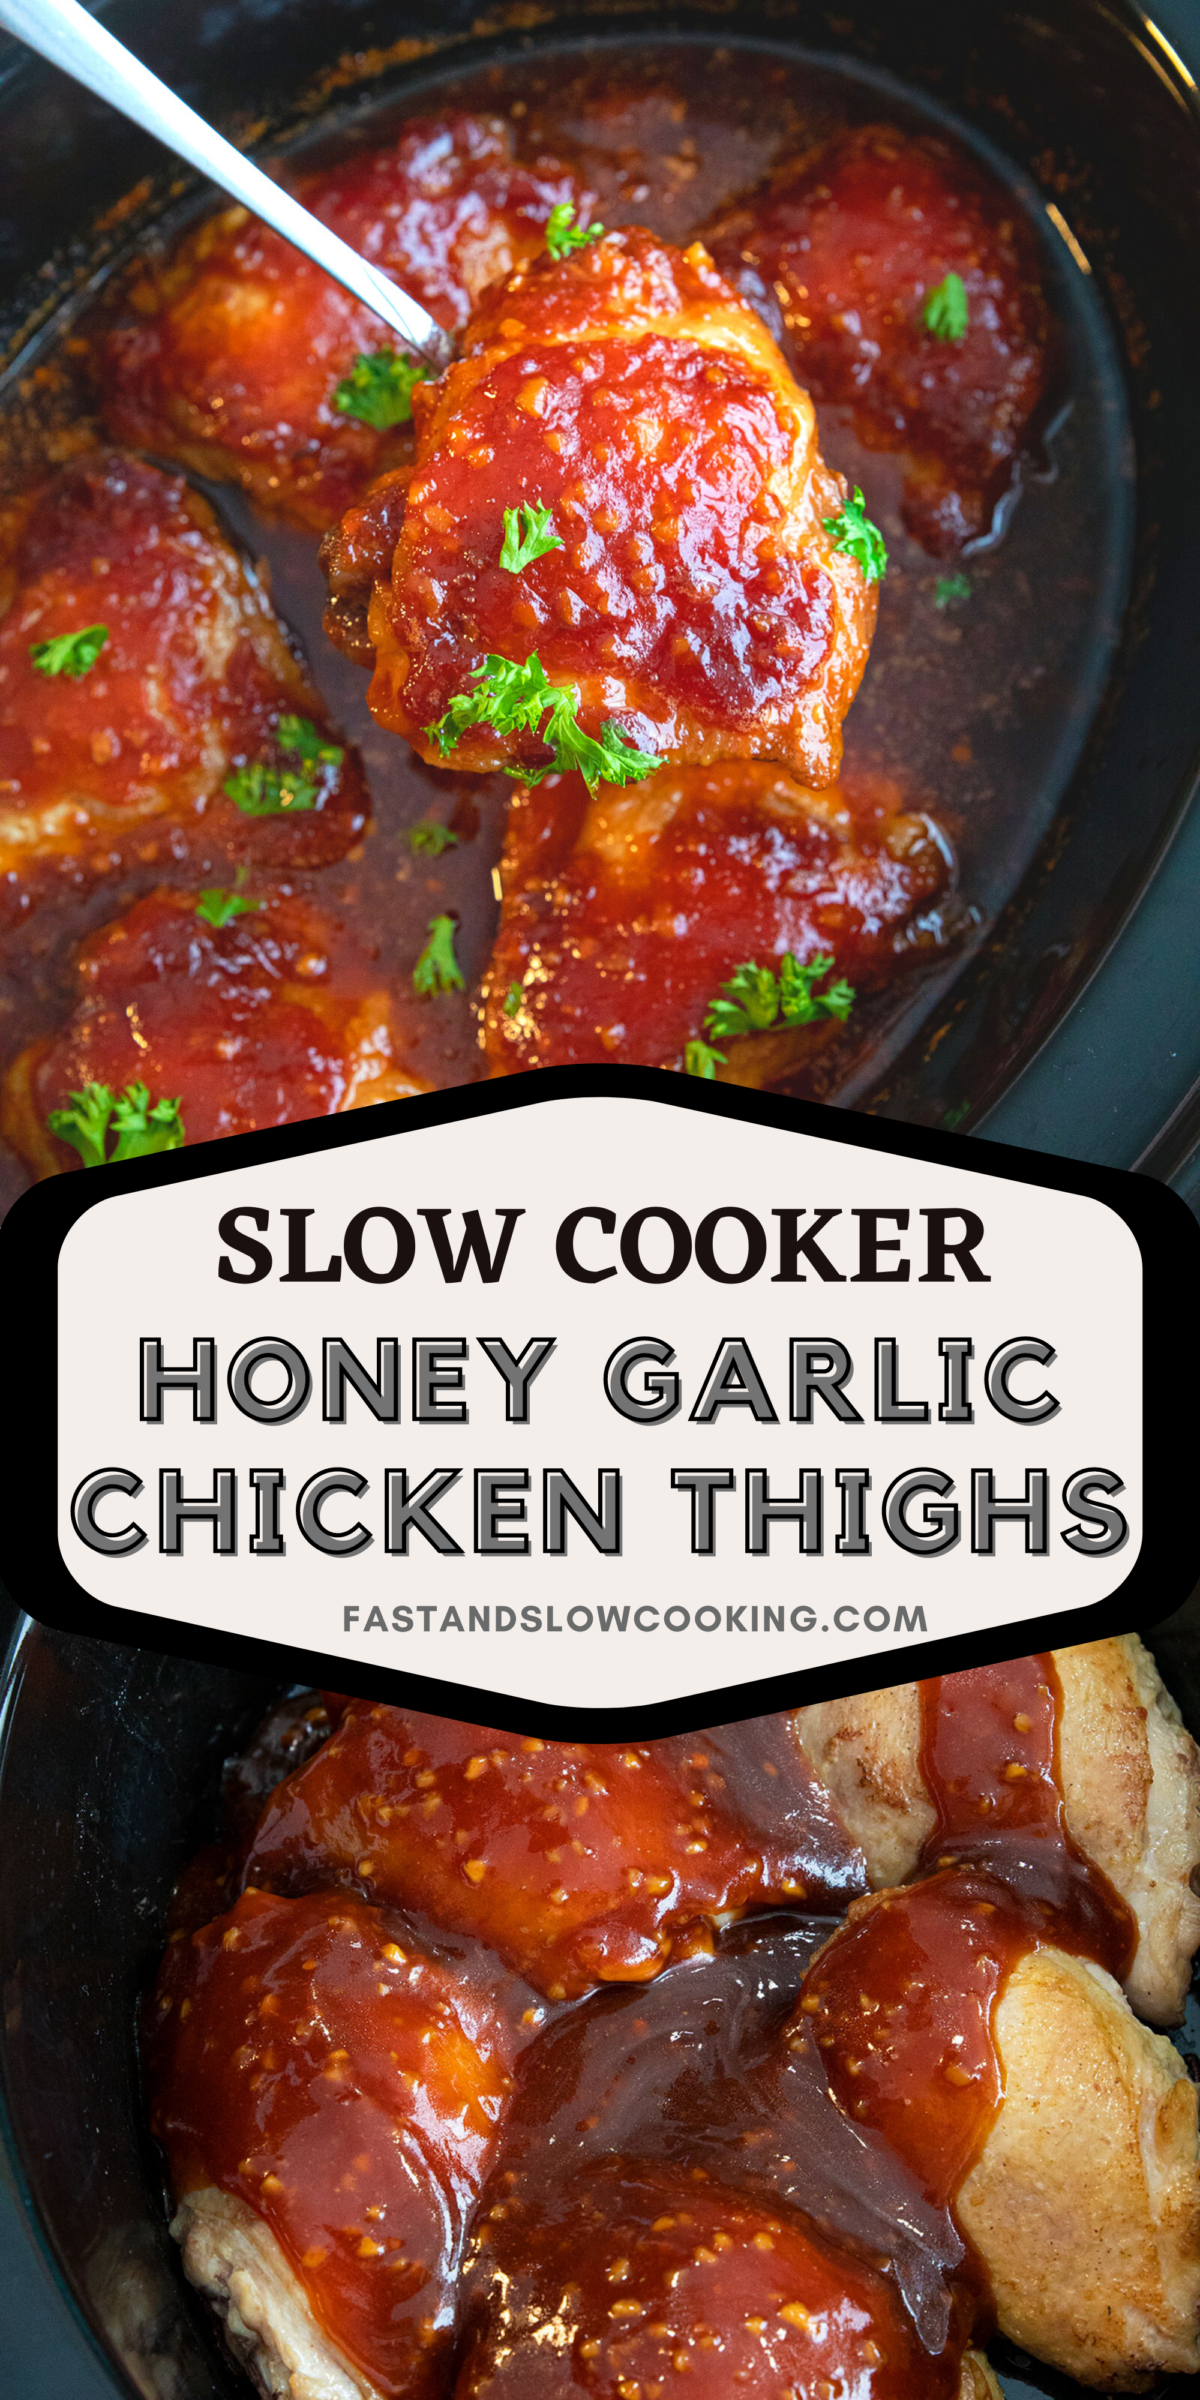 Fall off the bone tender chicken thighs cooked in the slow cooker in a delicious, easy honey garlic sauce!